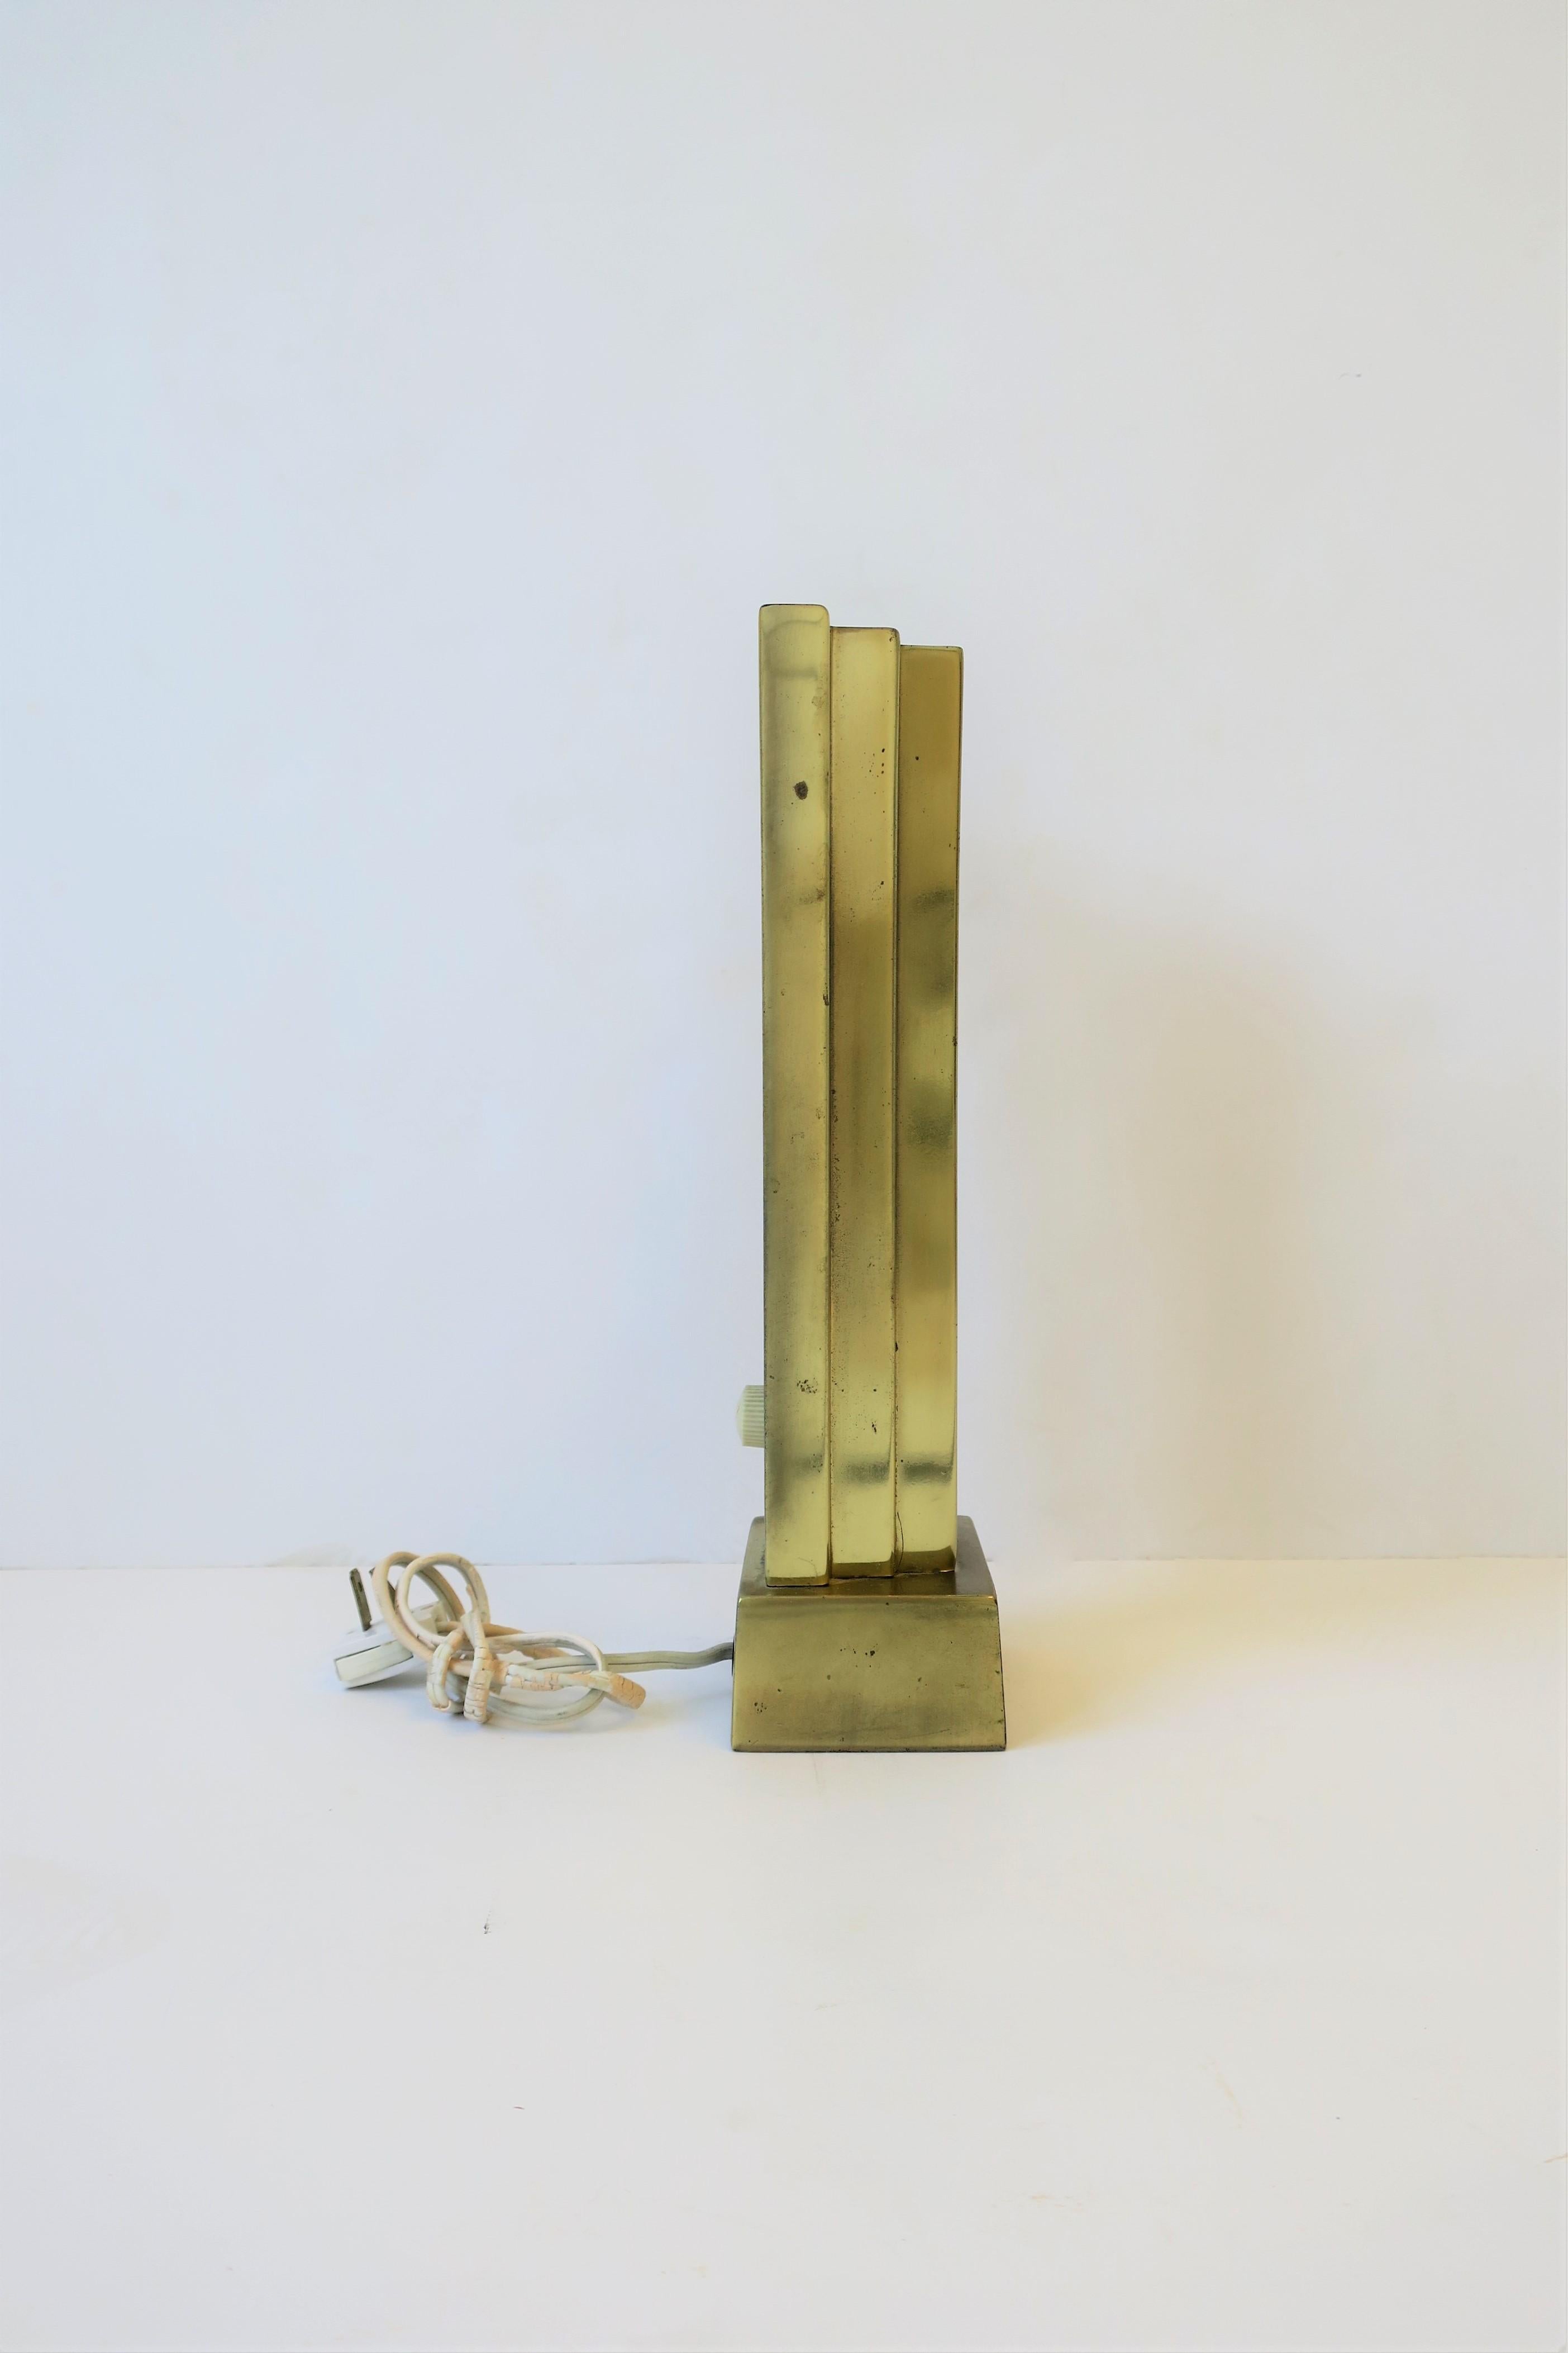 Late 20th Century Art Deco Brass Desk or Table Lamp by Stiffel, circa 1970s For Sale